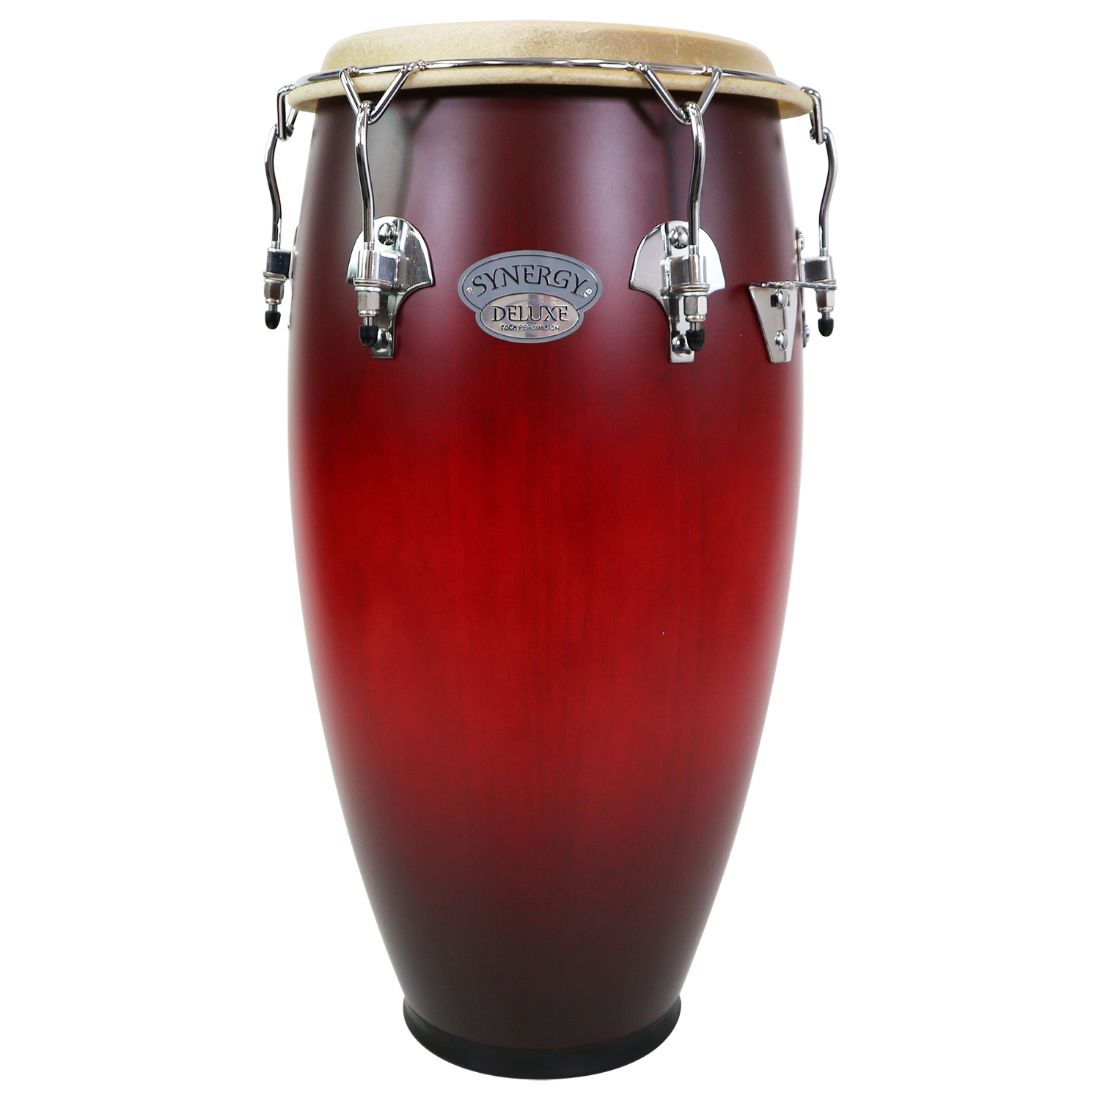 Toca Synergy Deluxe Tumba 12" Matte Wine Burst w/Basket Stand